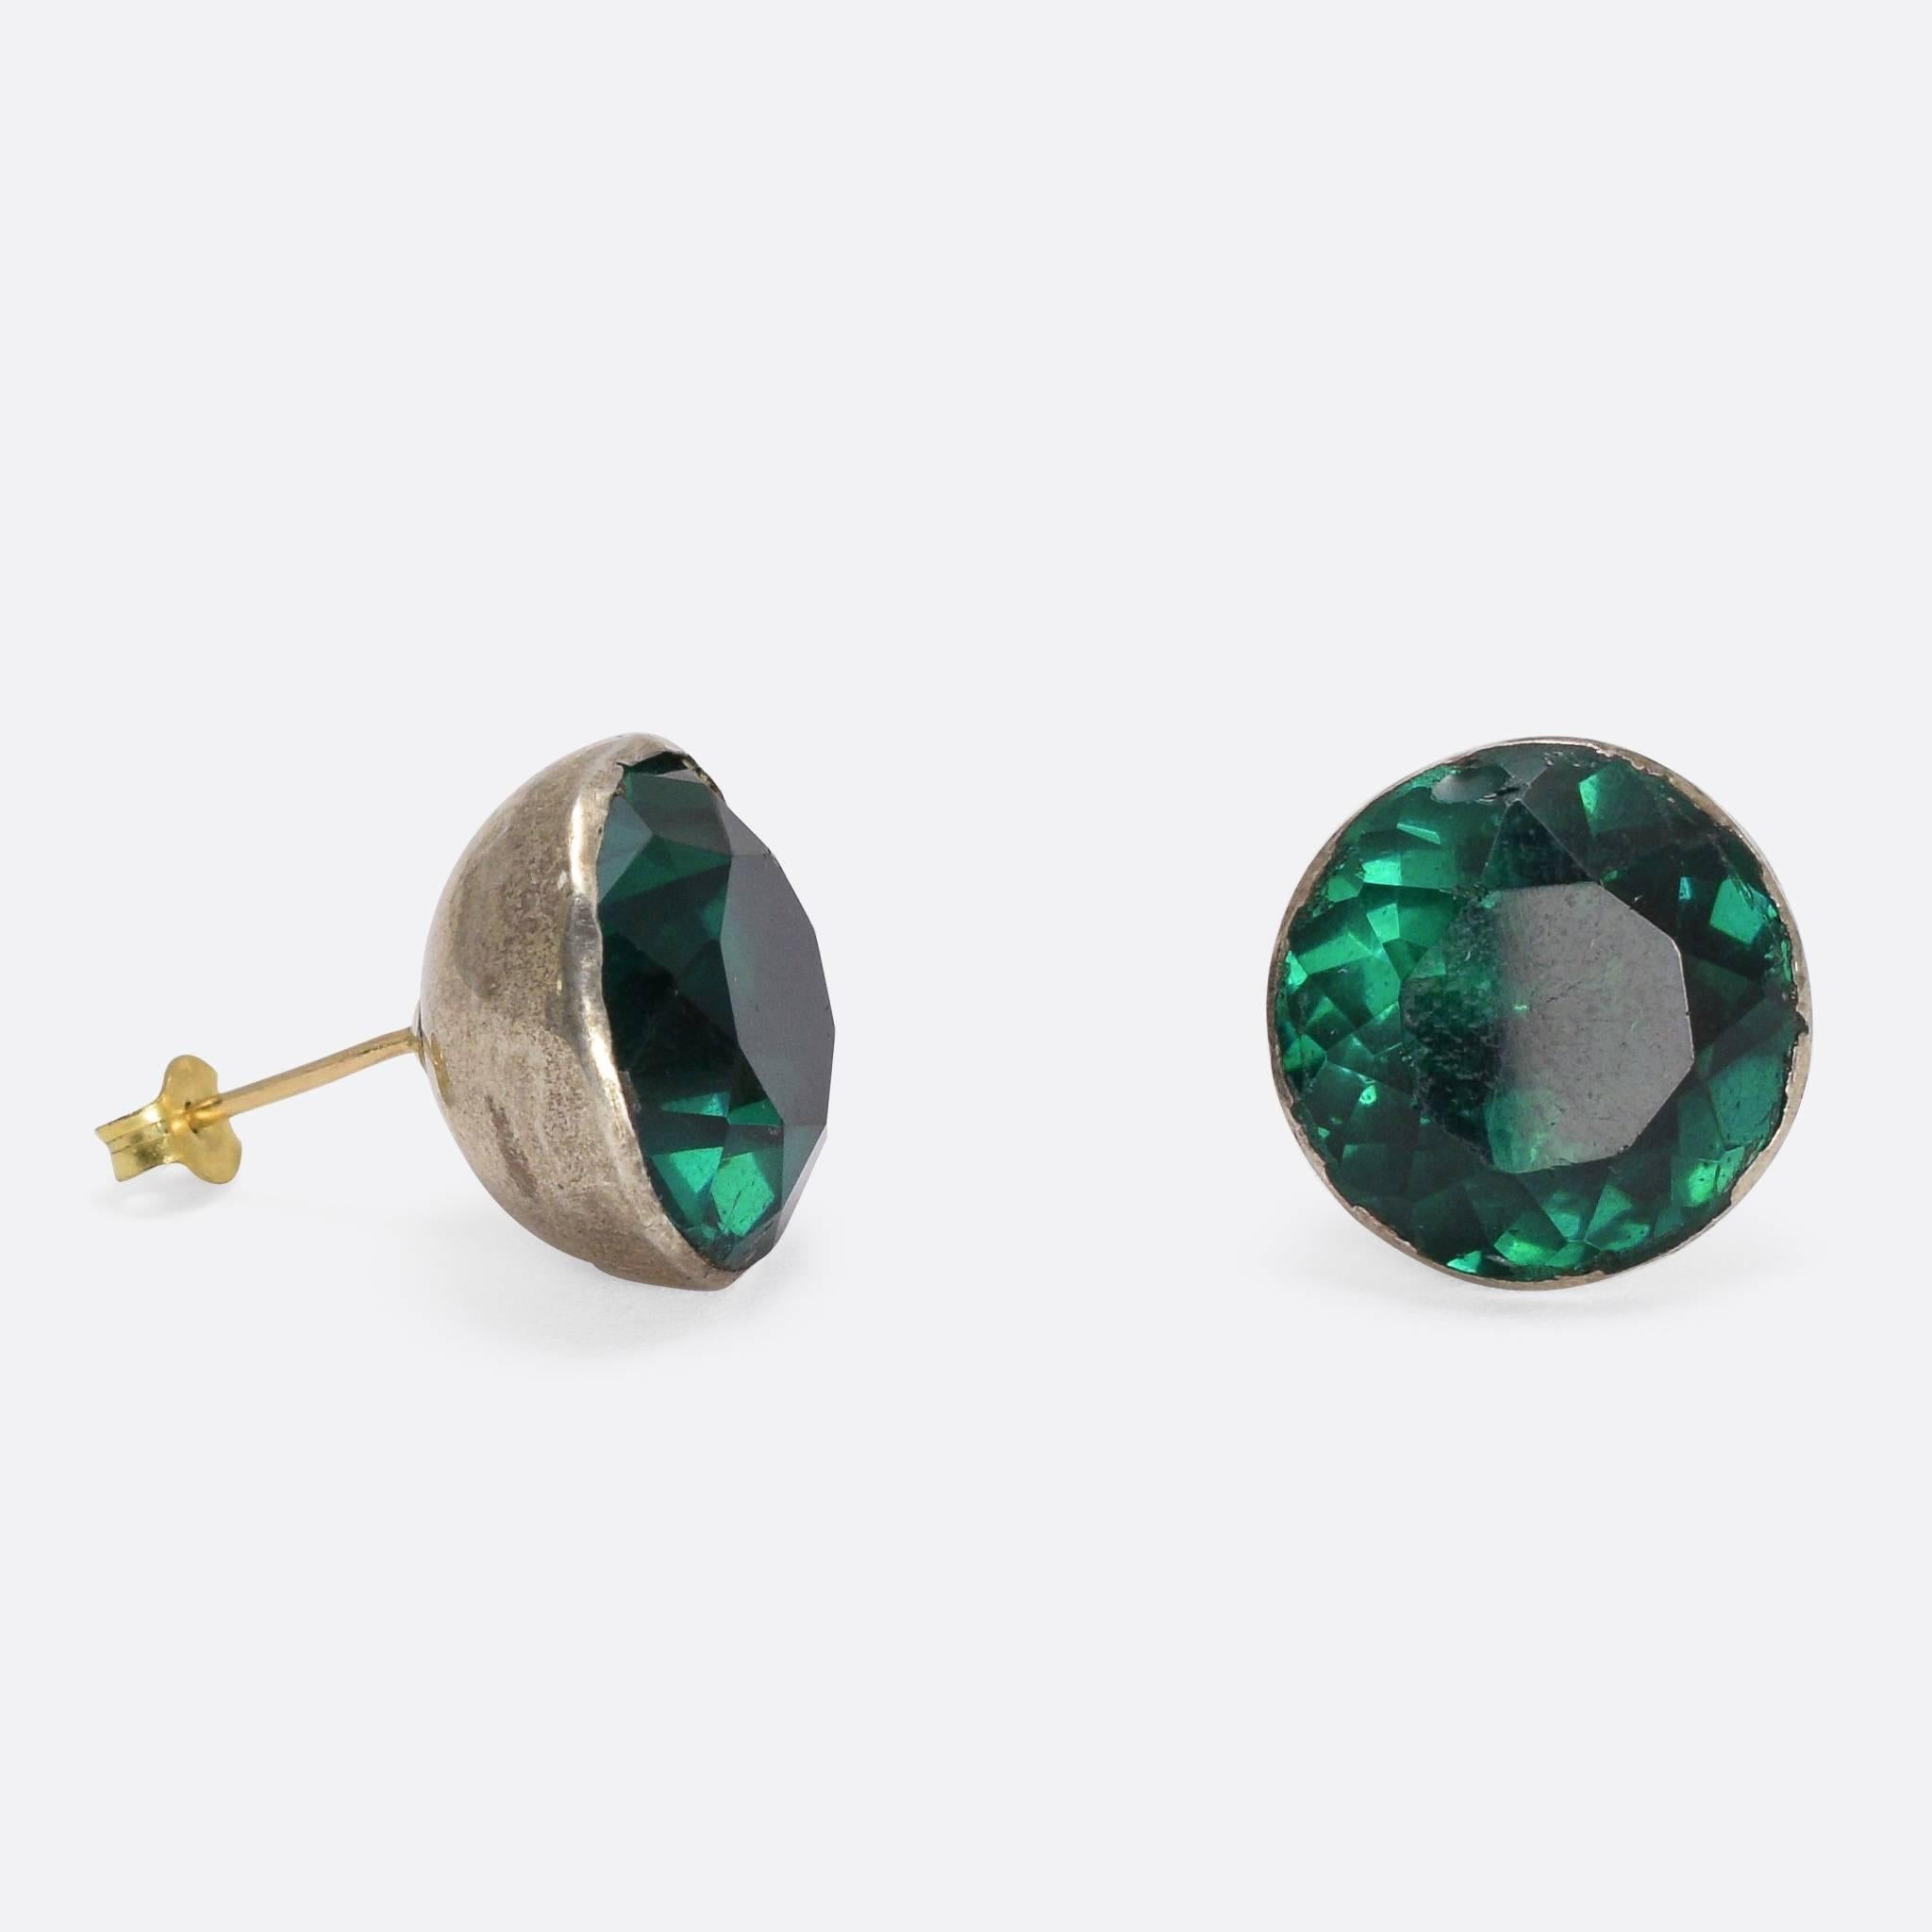 These marvellous antique earrings are super big… They measure 1.6cm across, each one set with a gorgeous deep green foil-backed paste stone. These earrings were made at a time when paste gems could command as much (if not more) than natural